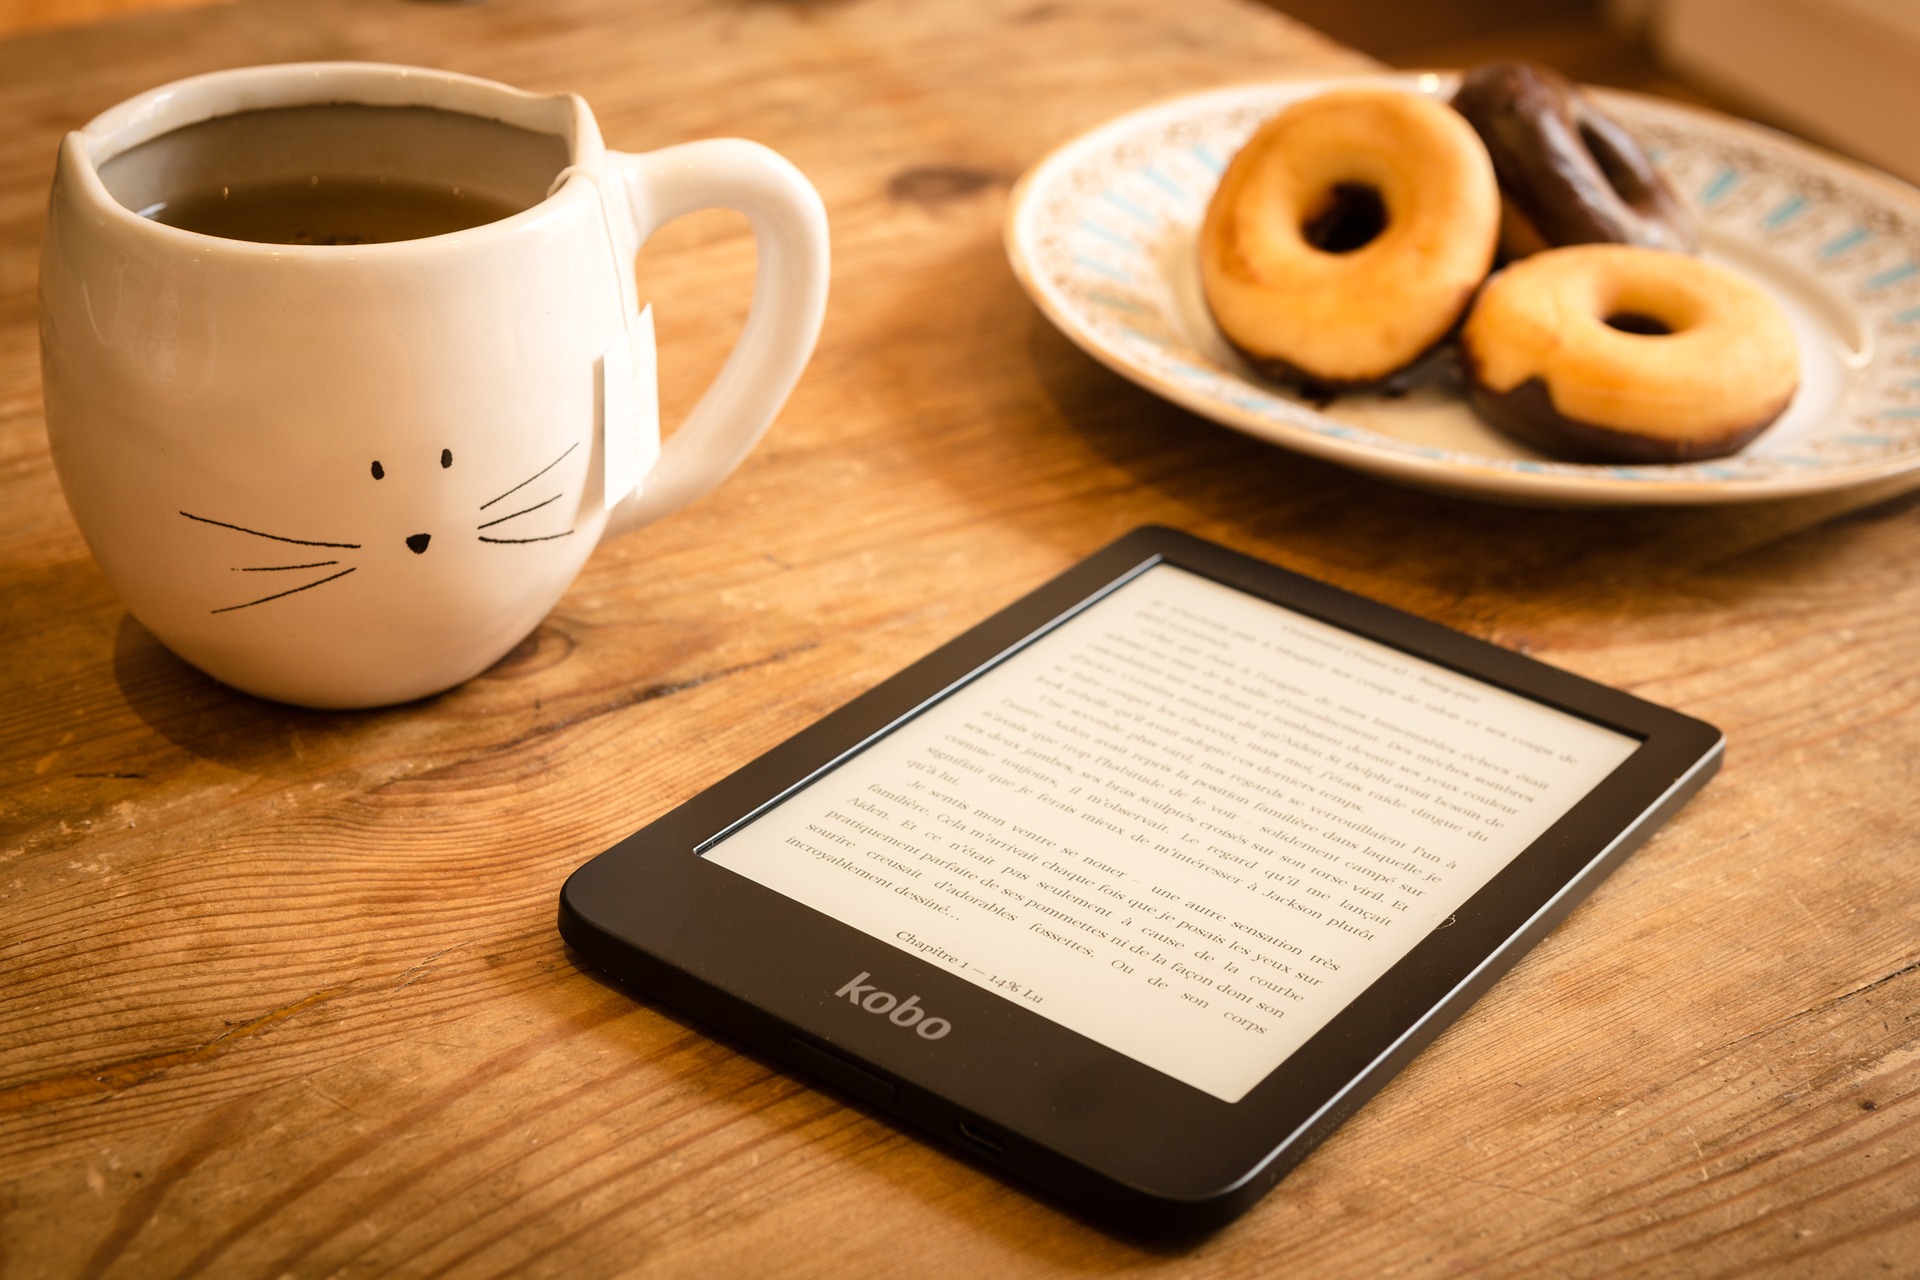 Declutter your life and read with kindle